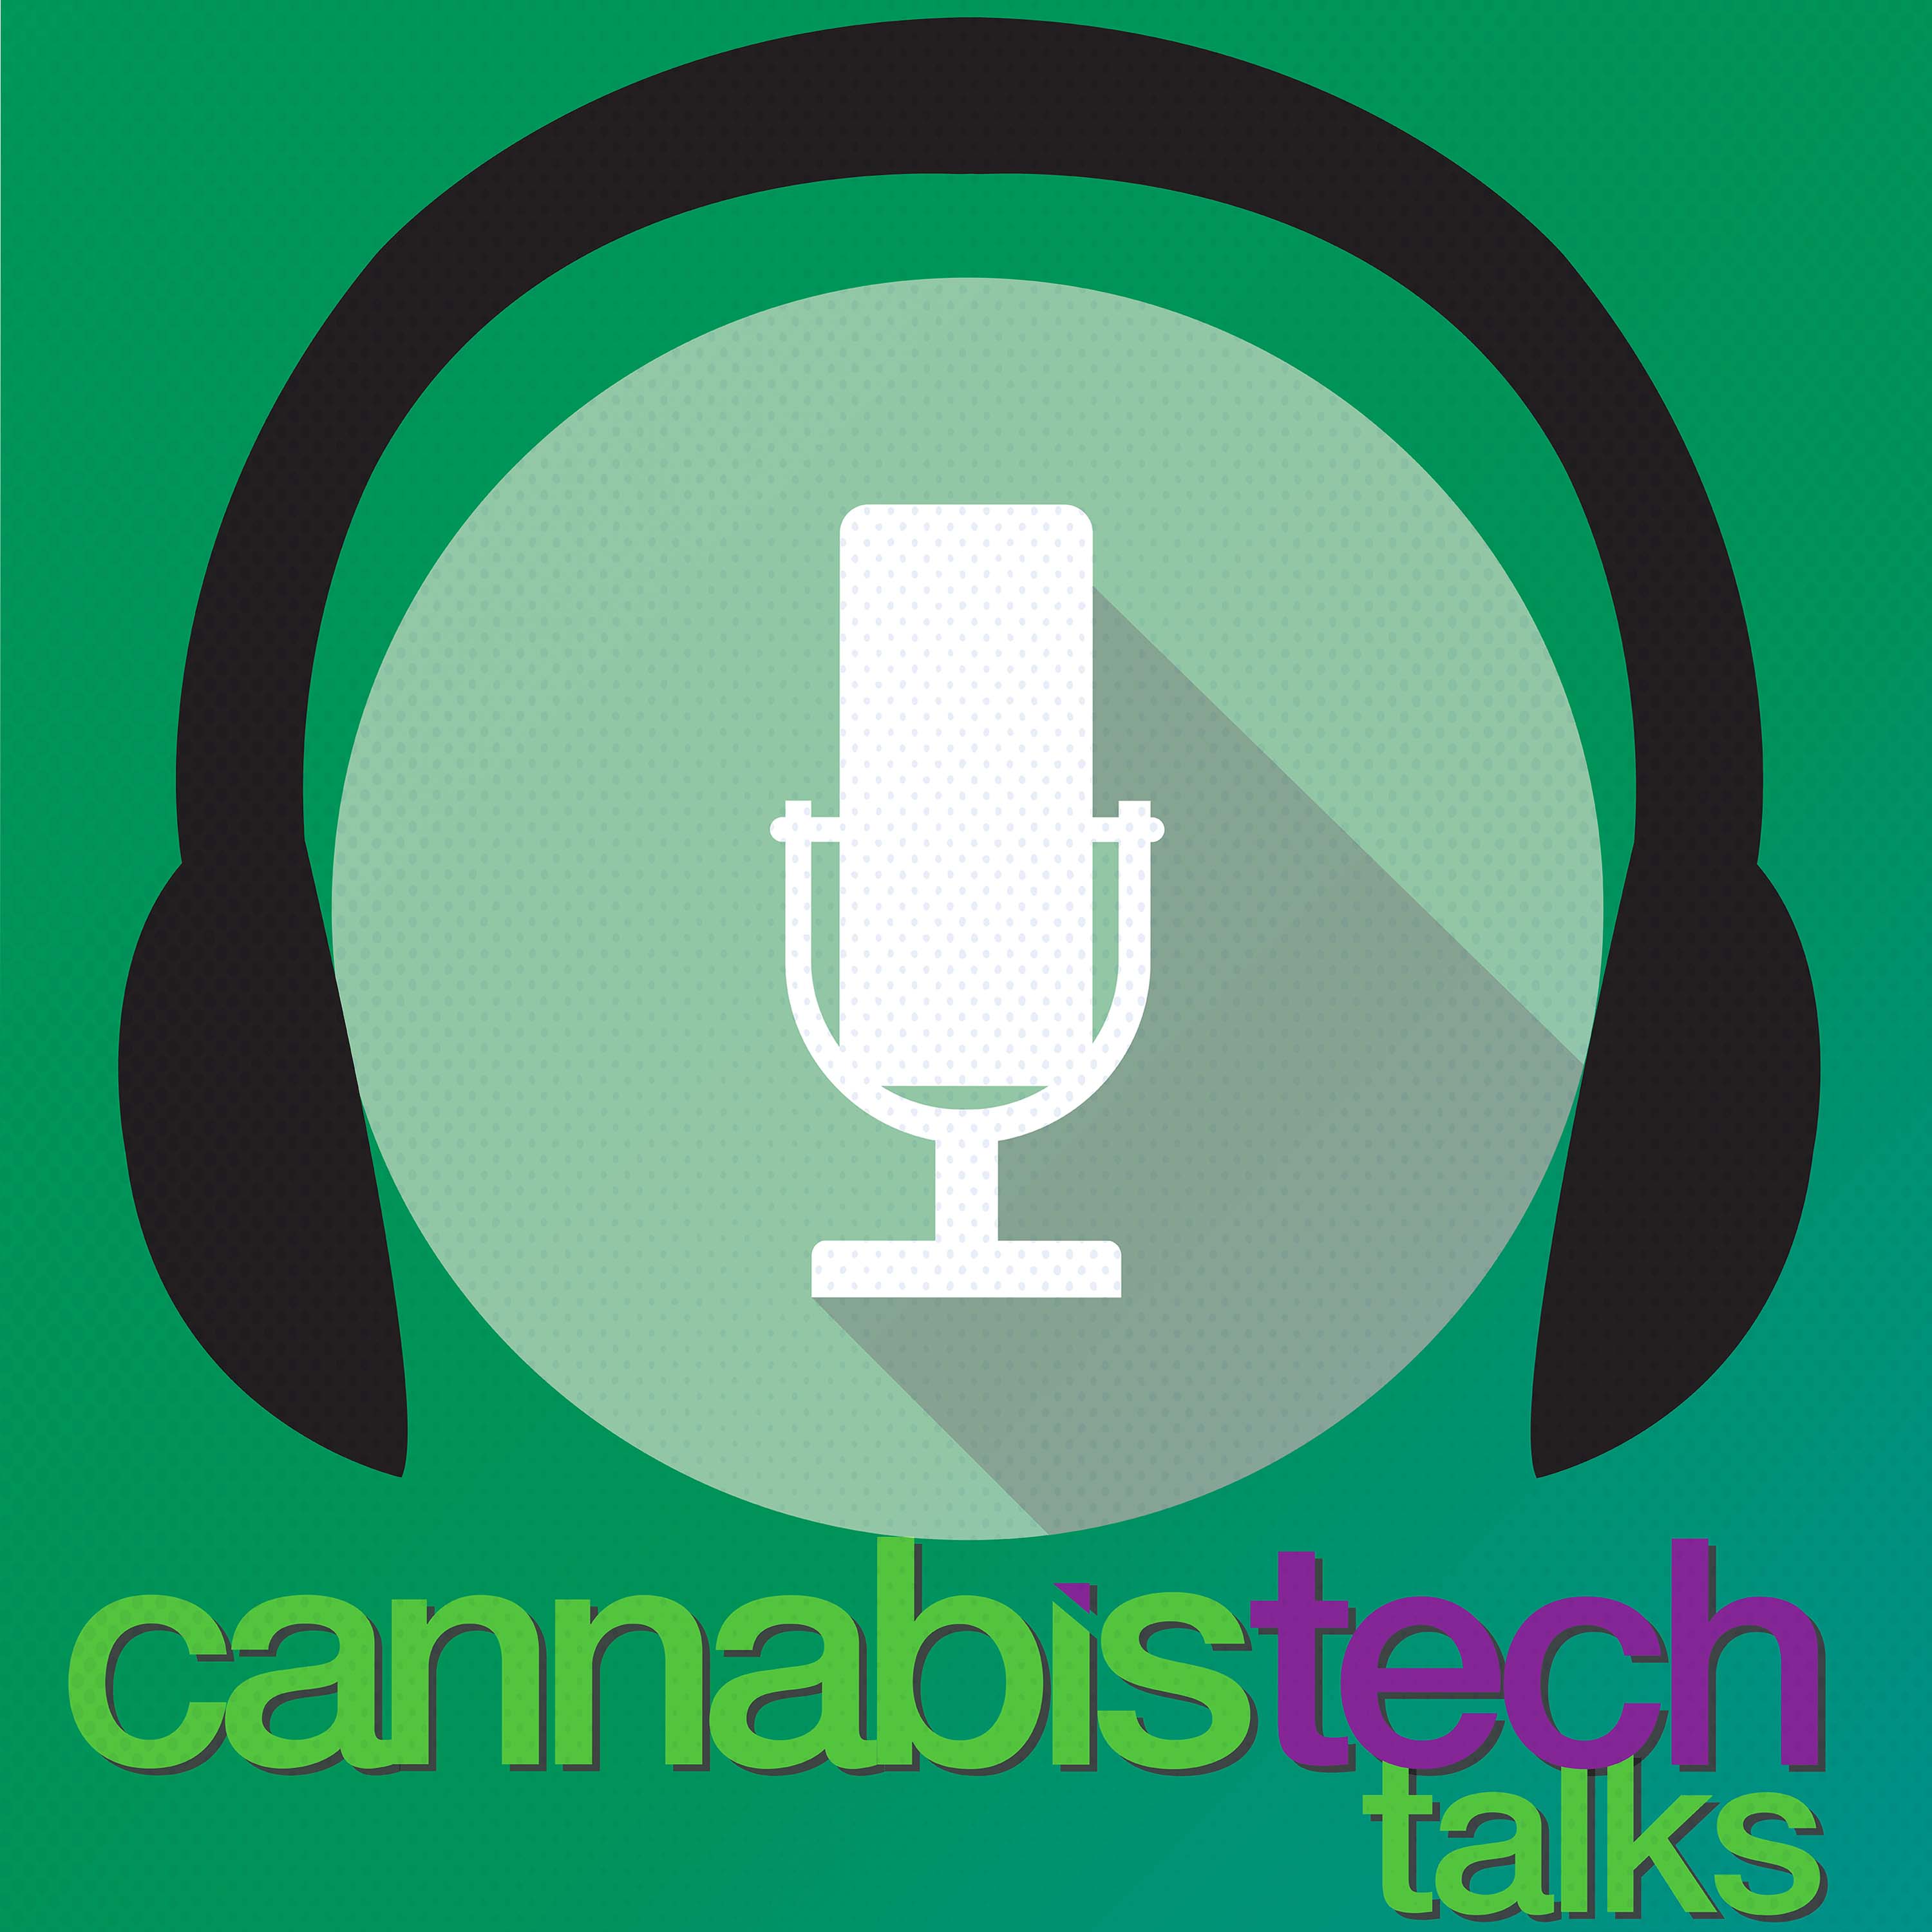 Episode 127: Information Technology Services for Cannabis Companies